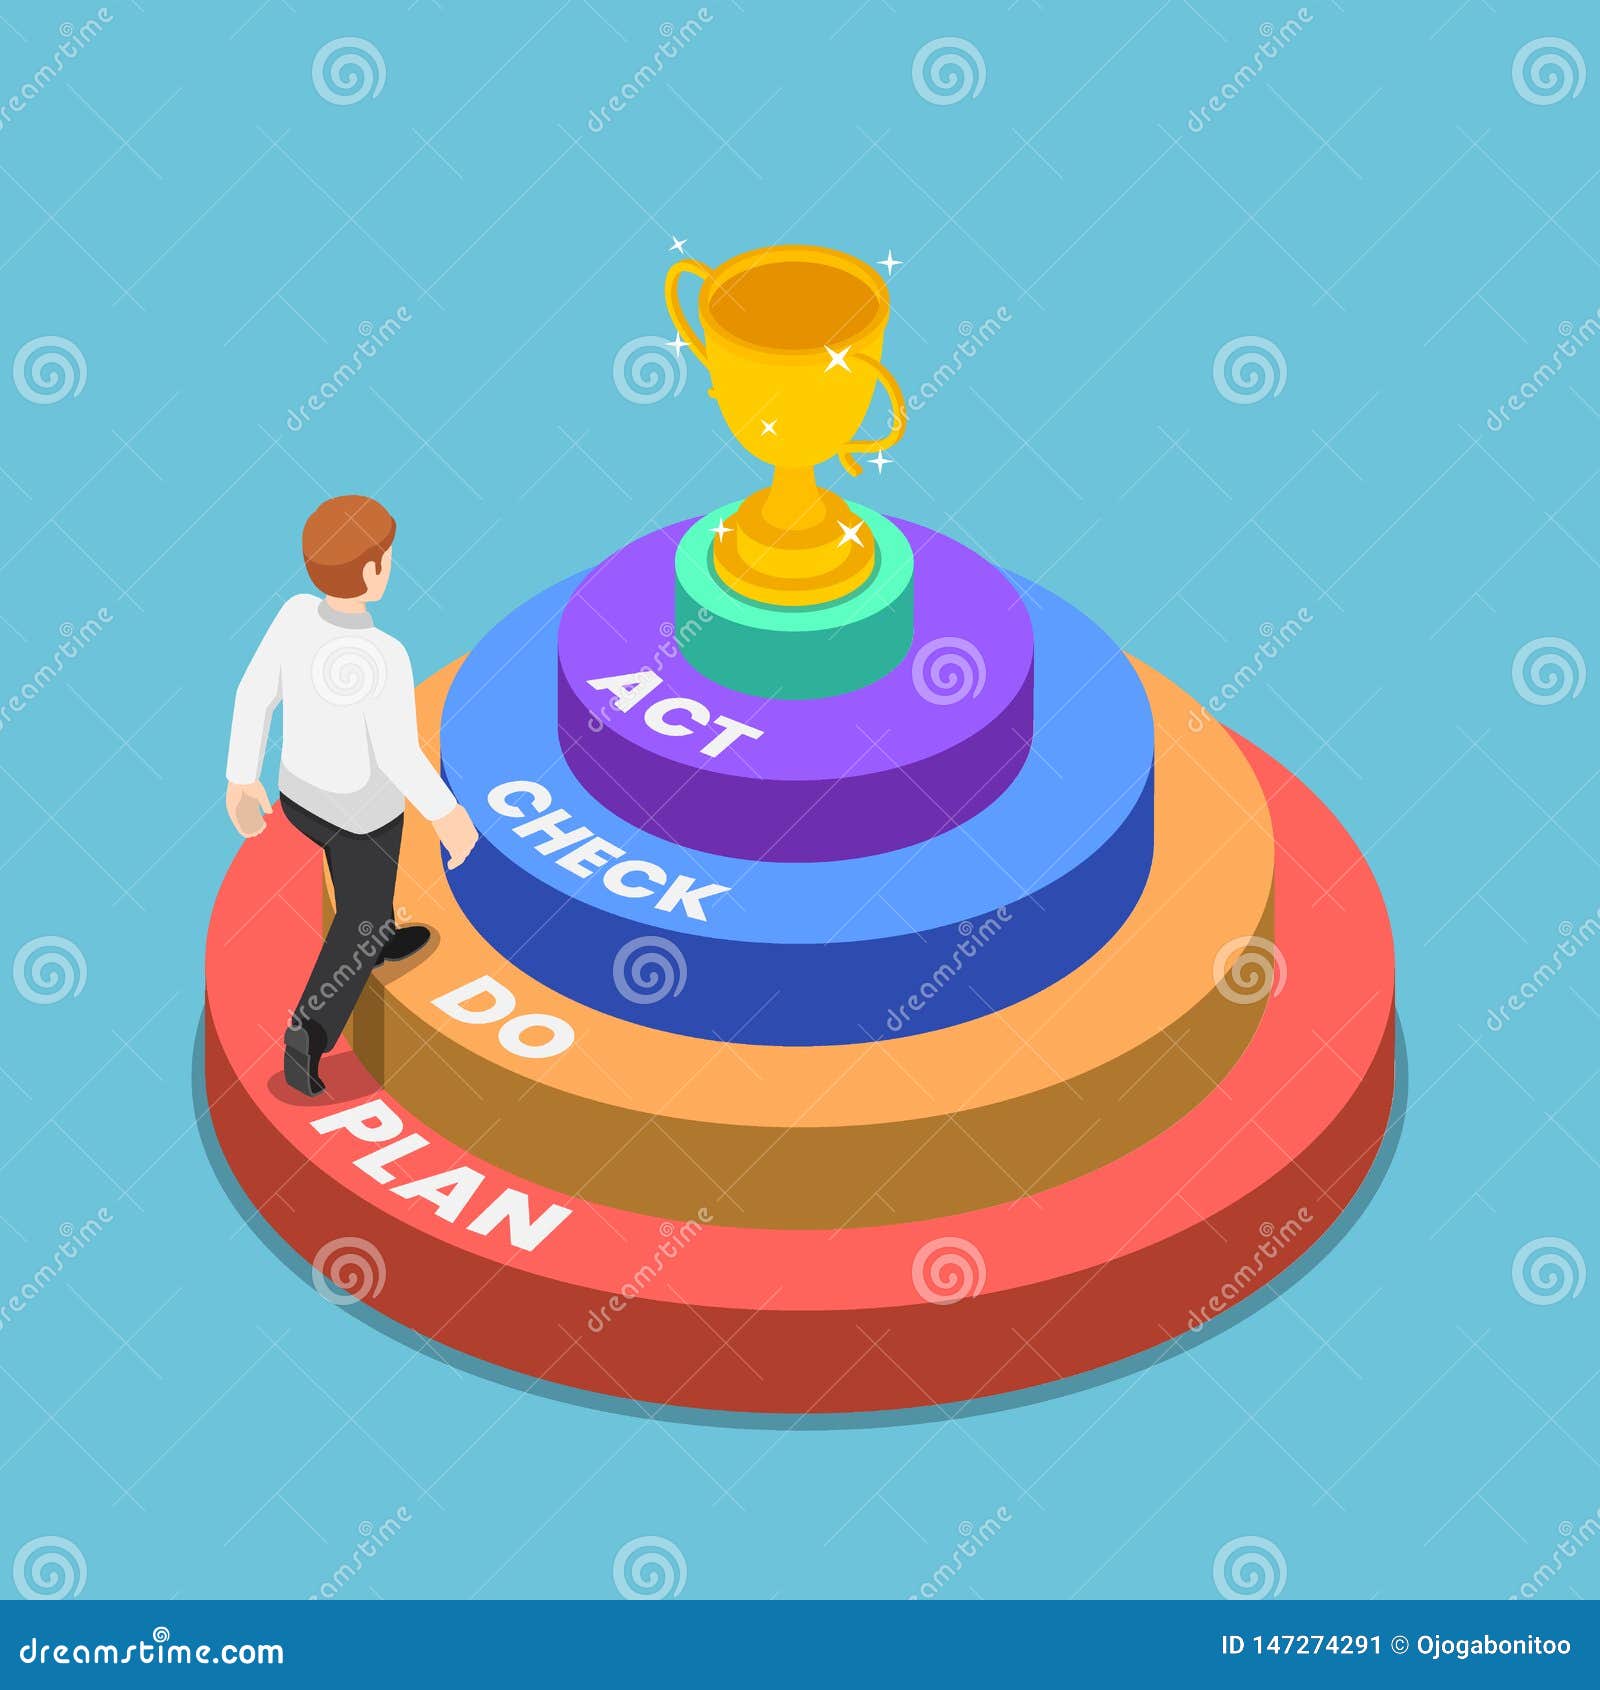 isometric businessman walking up plan do check act ladder to success trophy